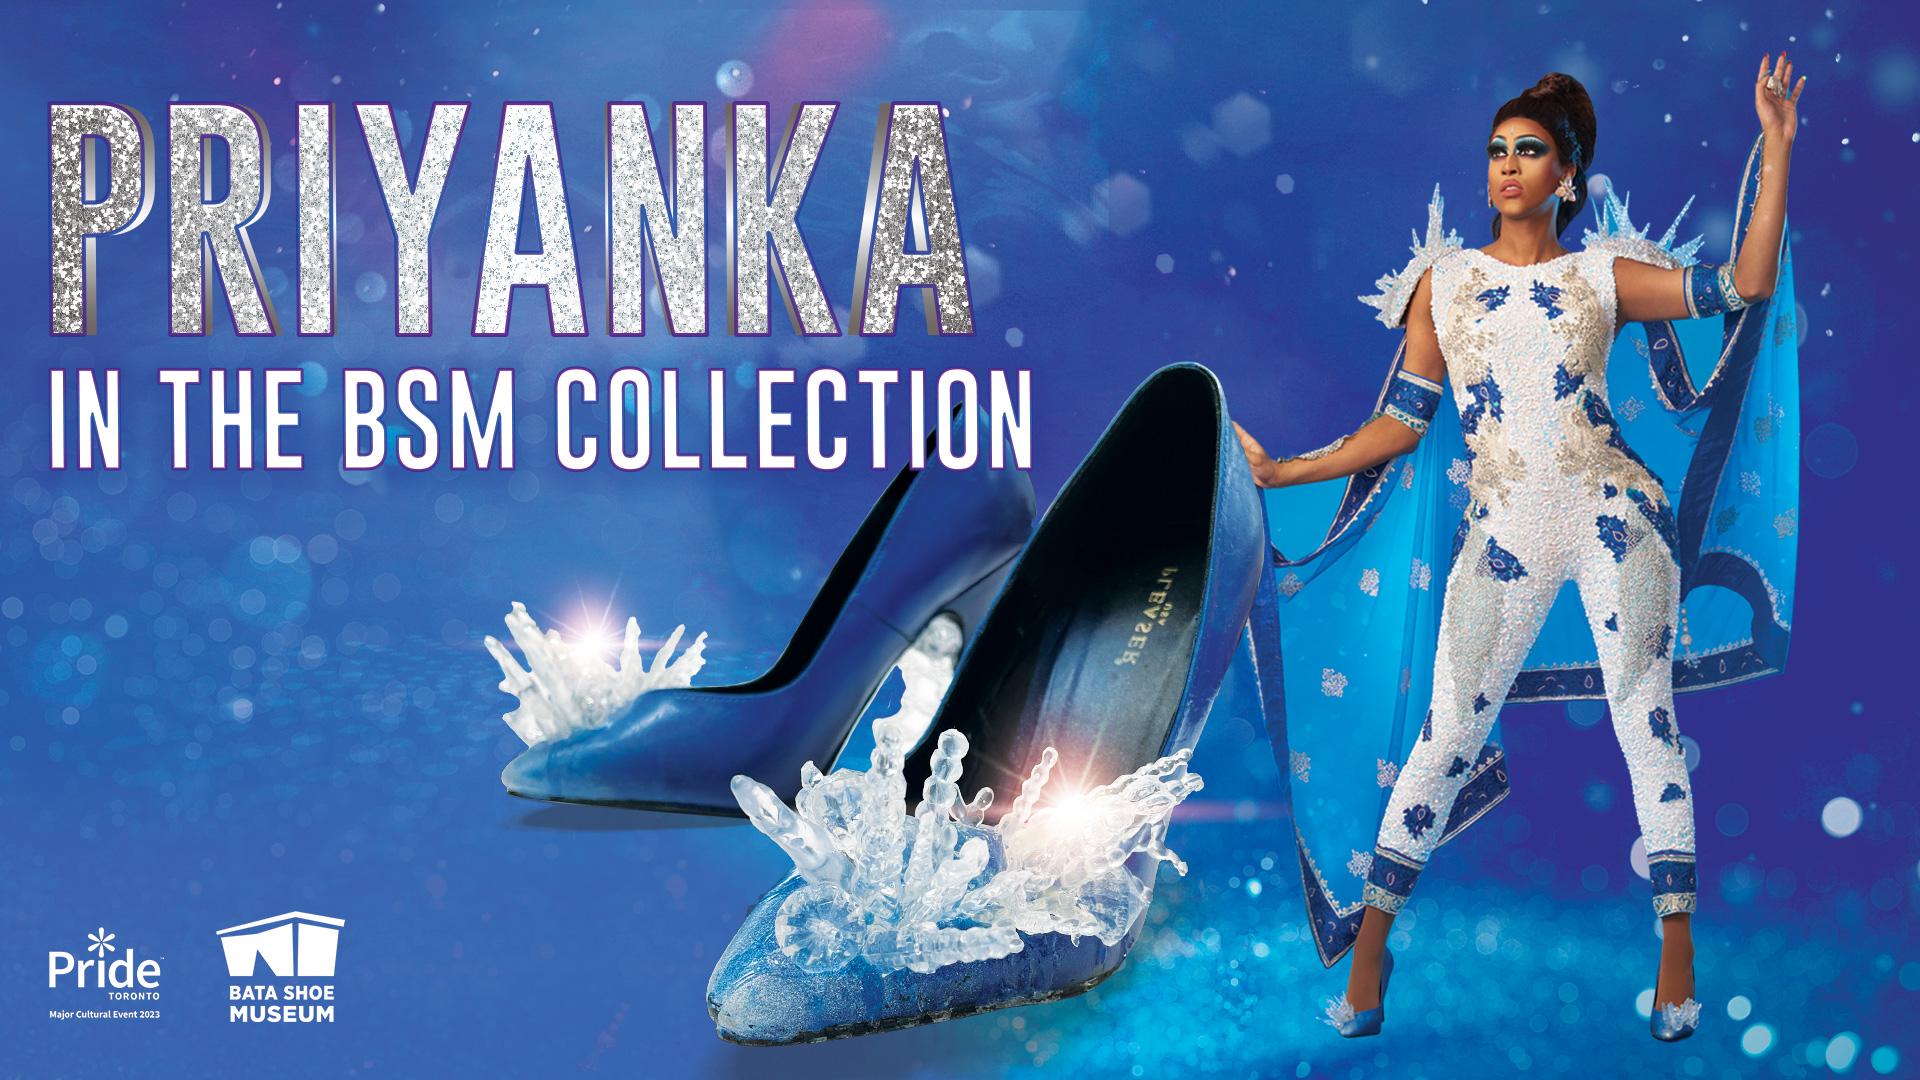 Priyanka in the BSM collection